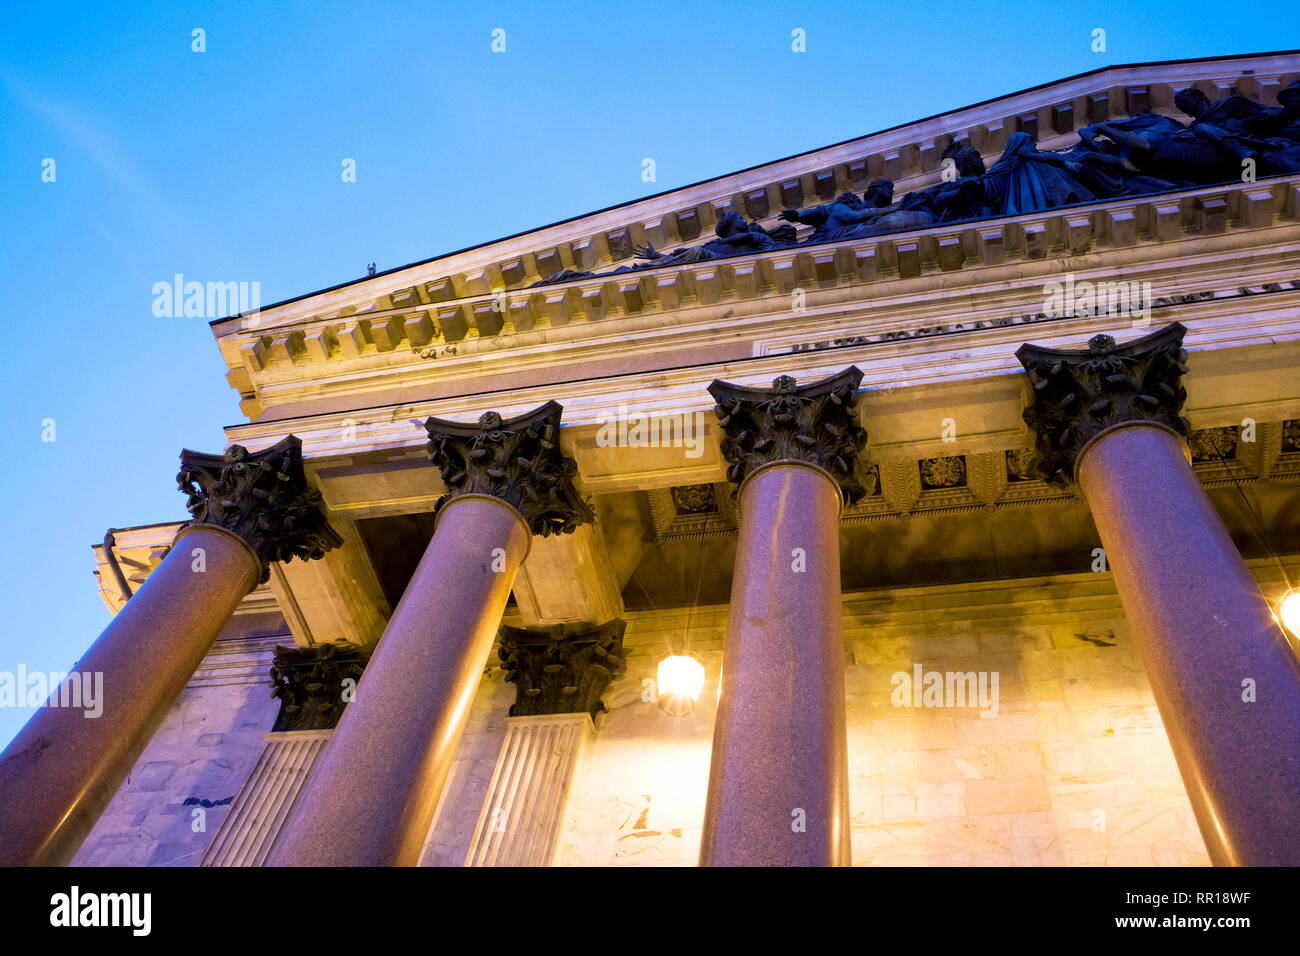 Facade fragment of ancient Saint Isaac's orthodox cathedral, massive granite columns Stock Photo